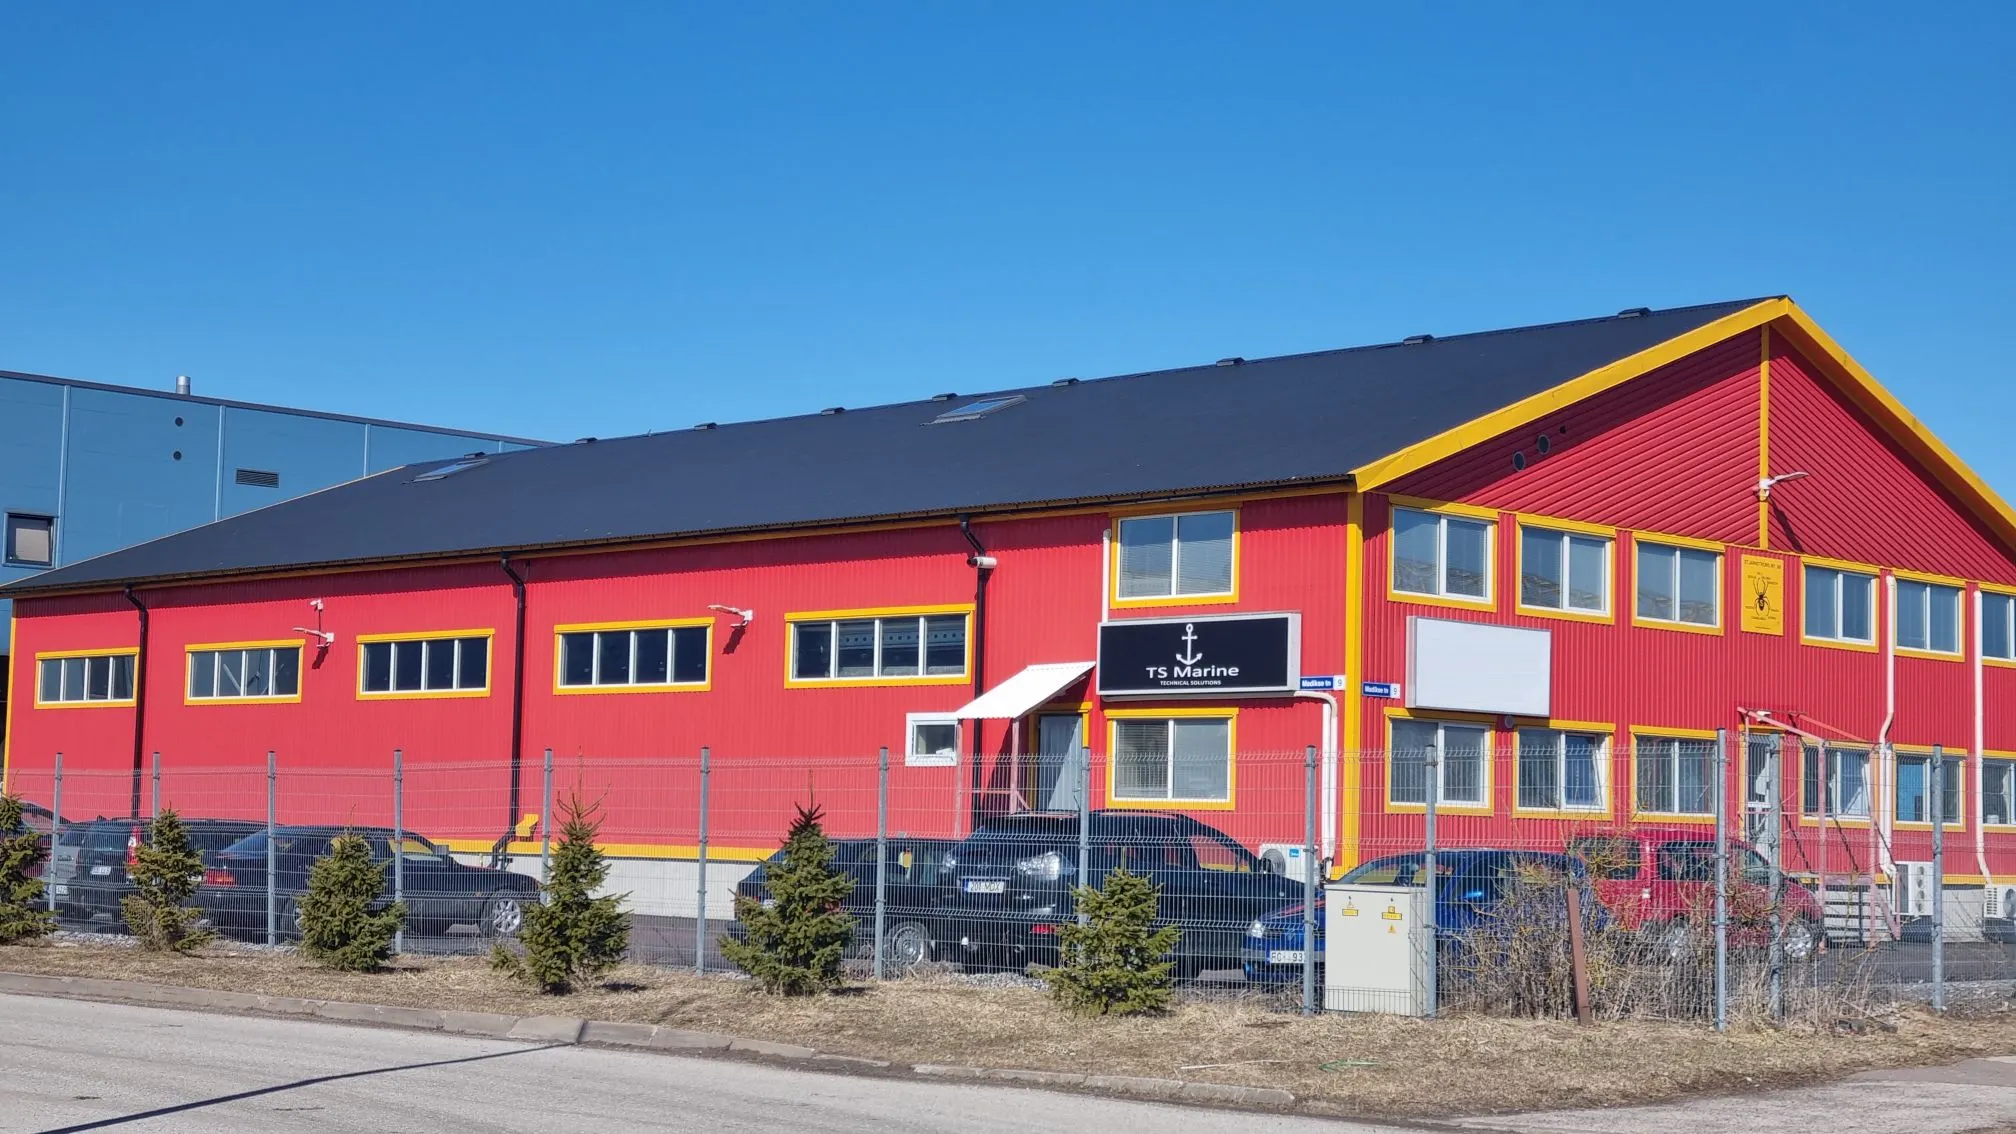 Industrial building with a striking red facade and yellow trim around the edges and on the gables. Office TSBoats.